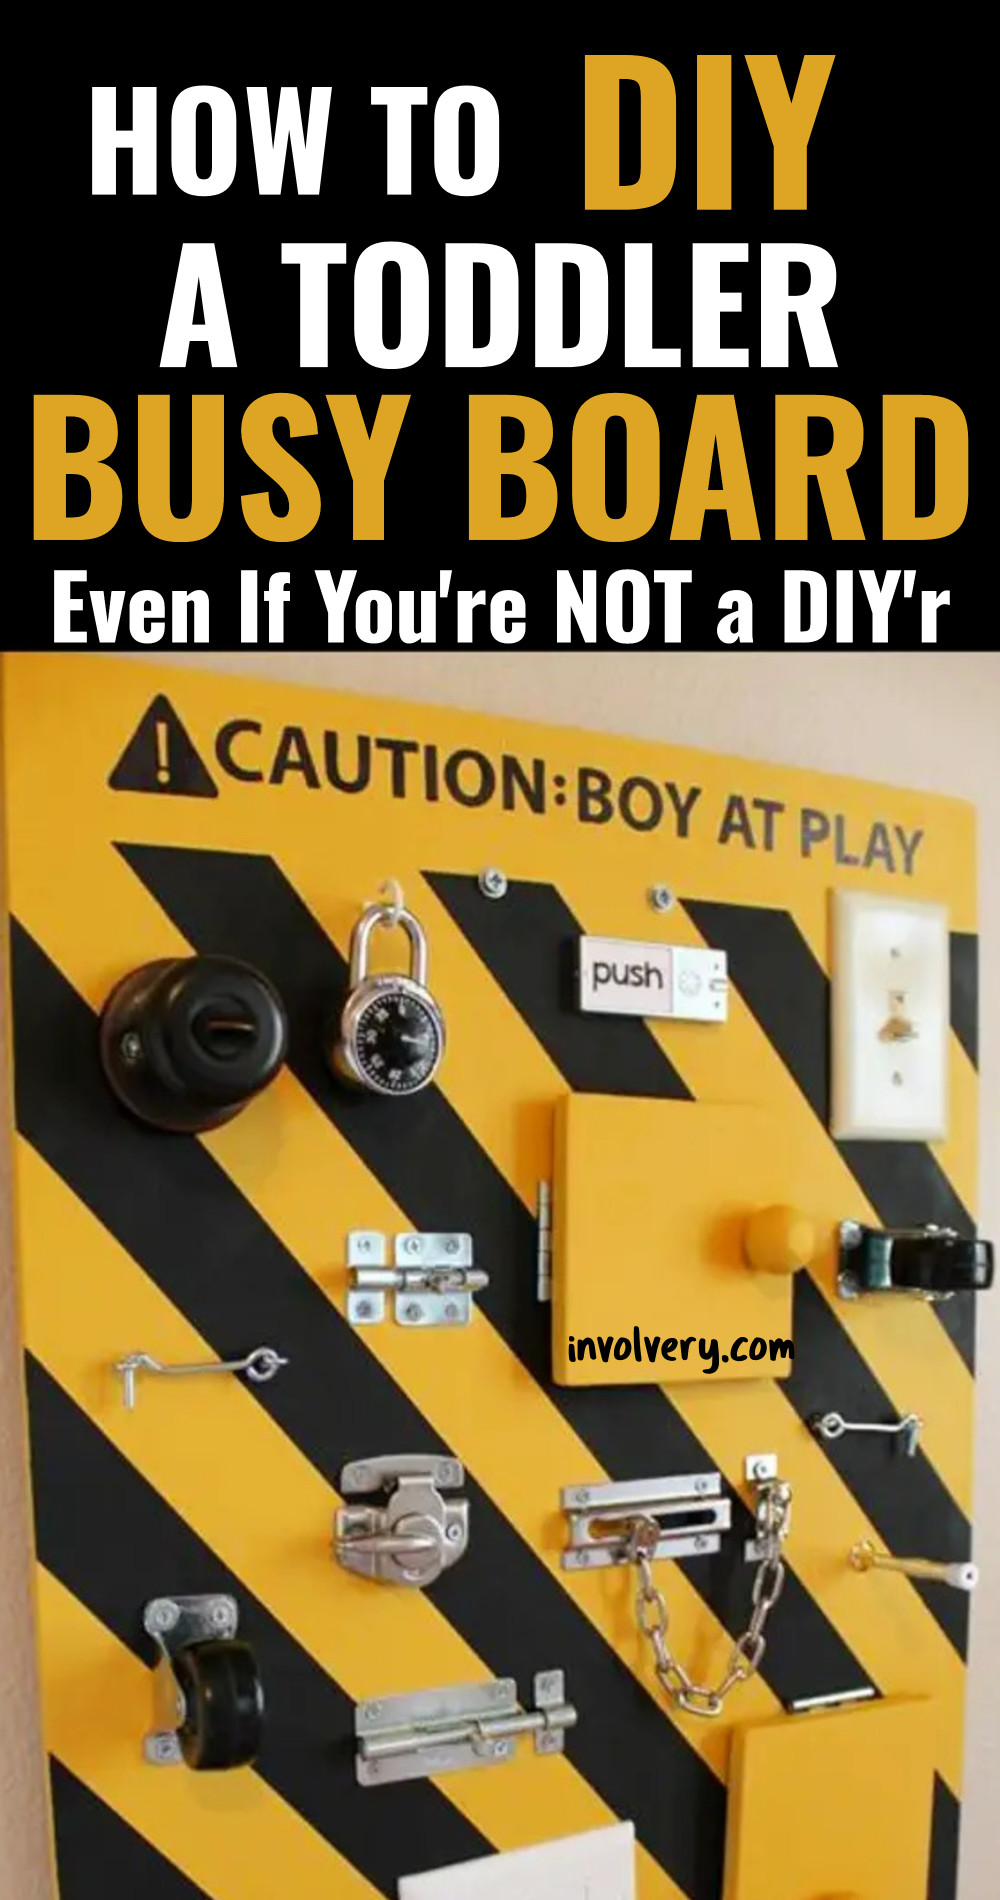 how to DIY a busy board for your toddler if you're not a DIY'r